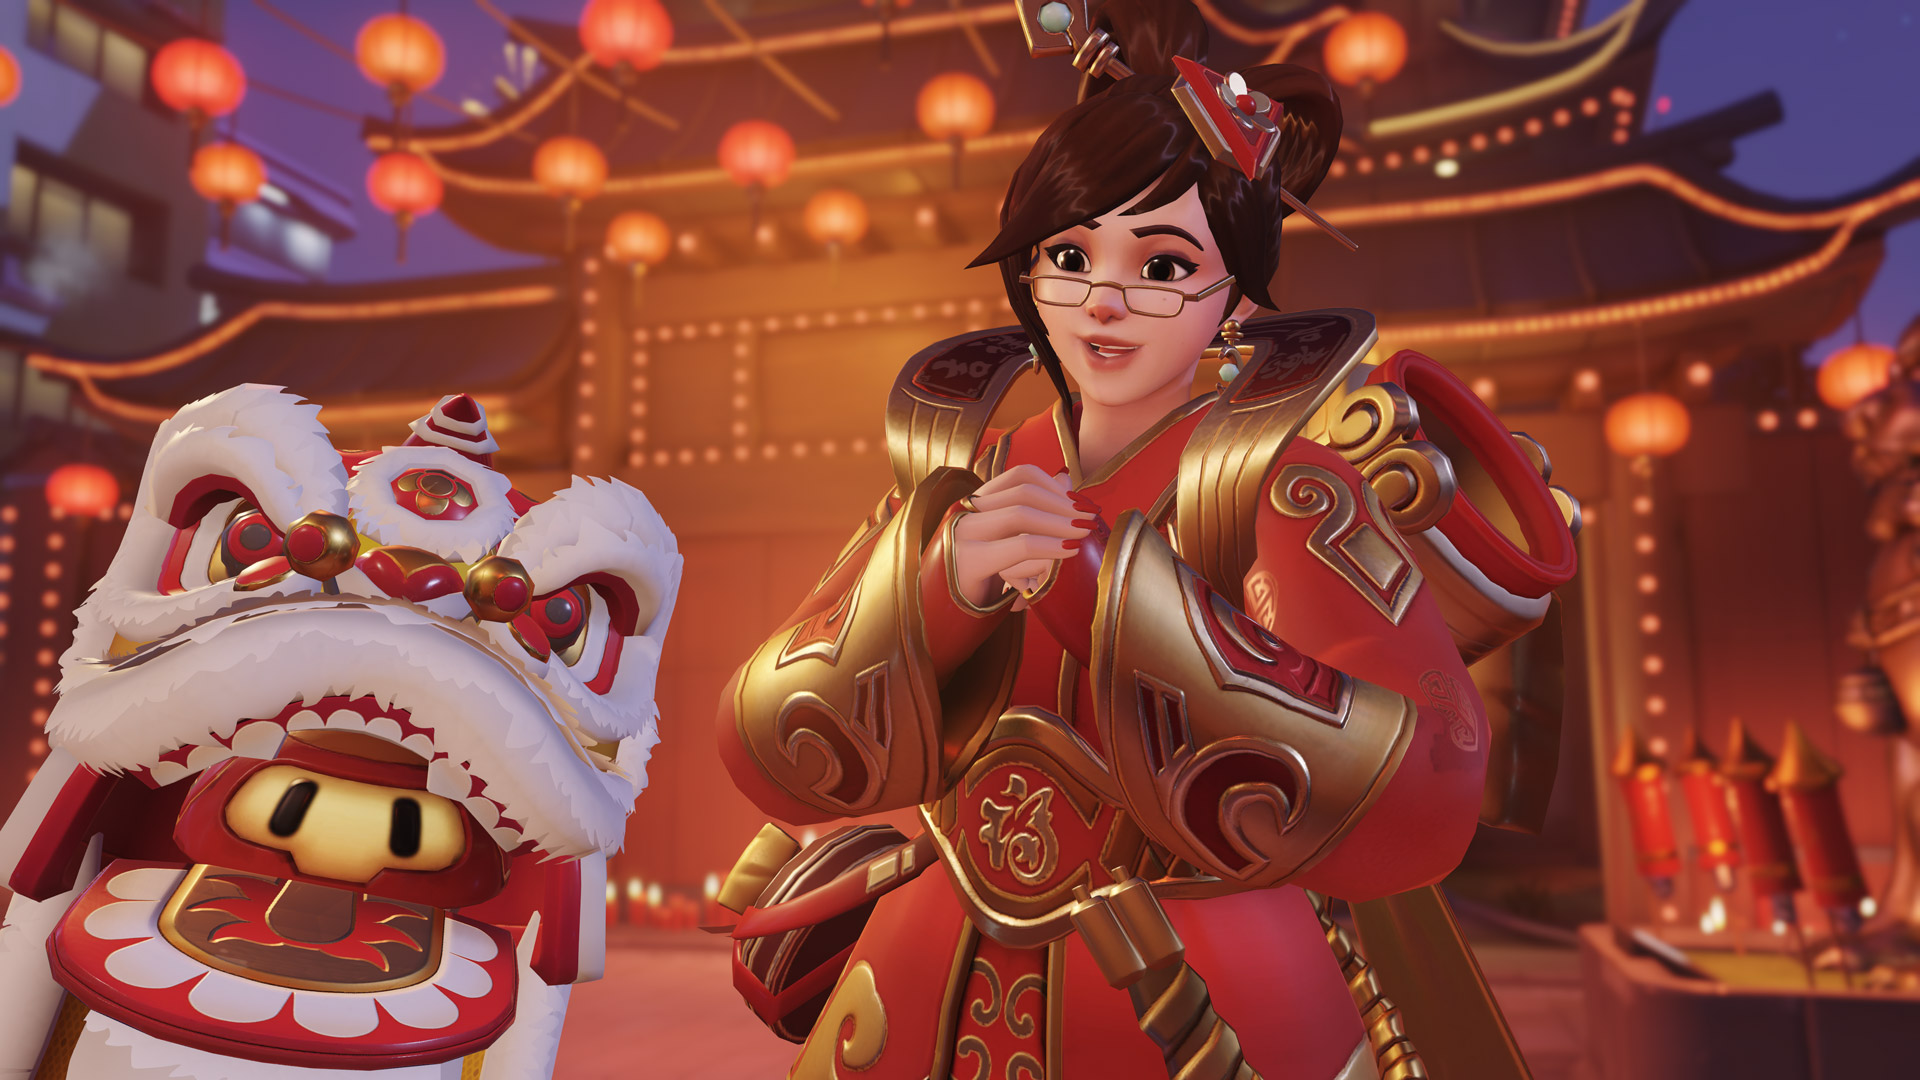 Overwatch's Year of the Dog Lunar New Year event begins next week